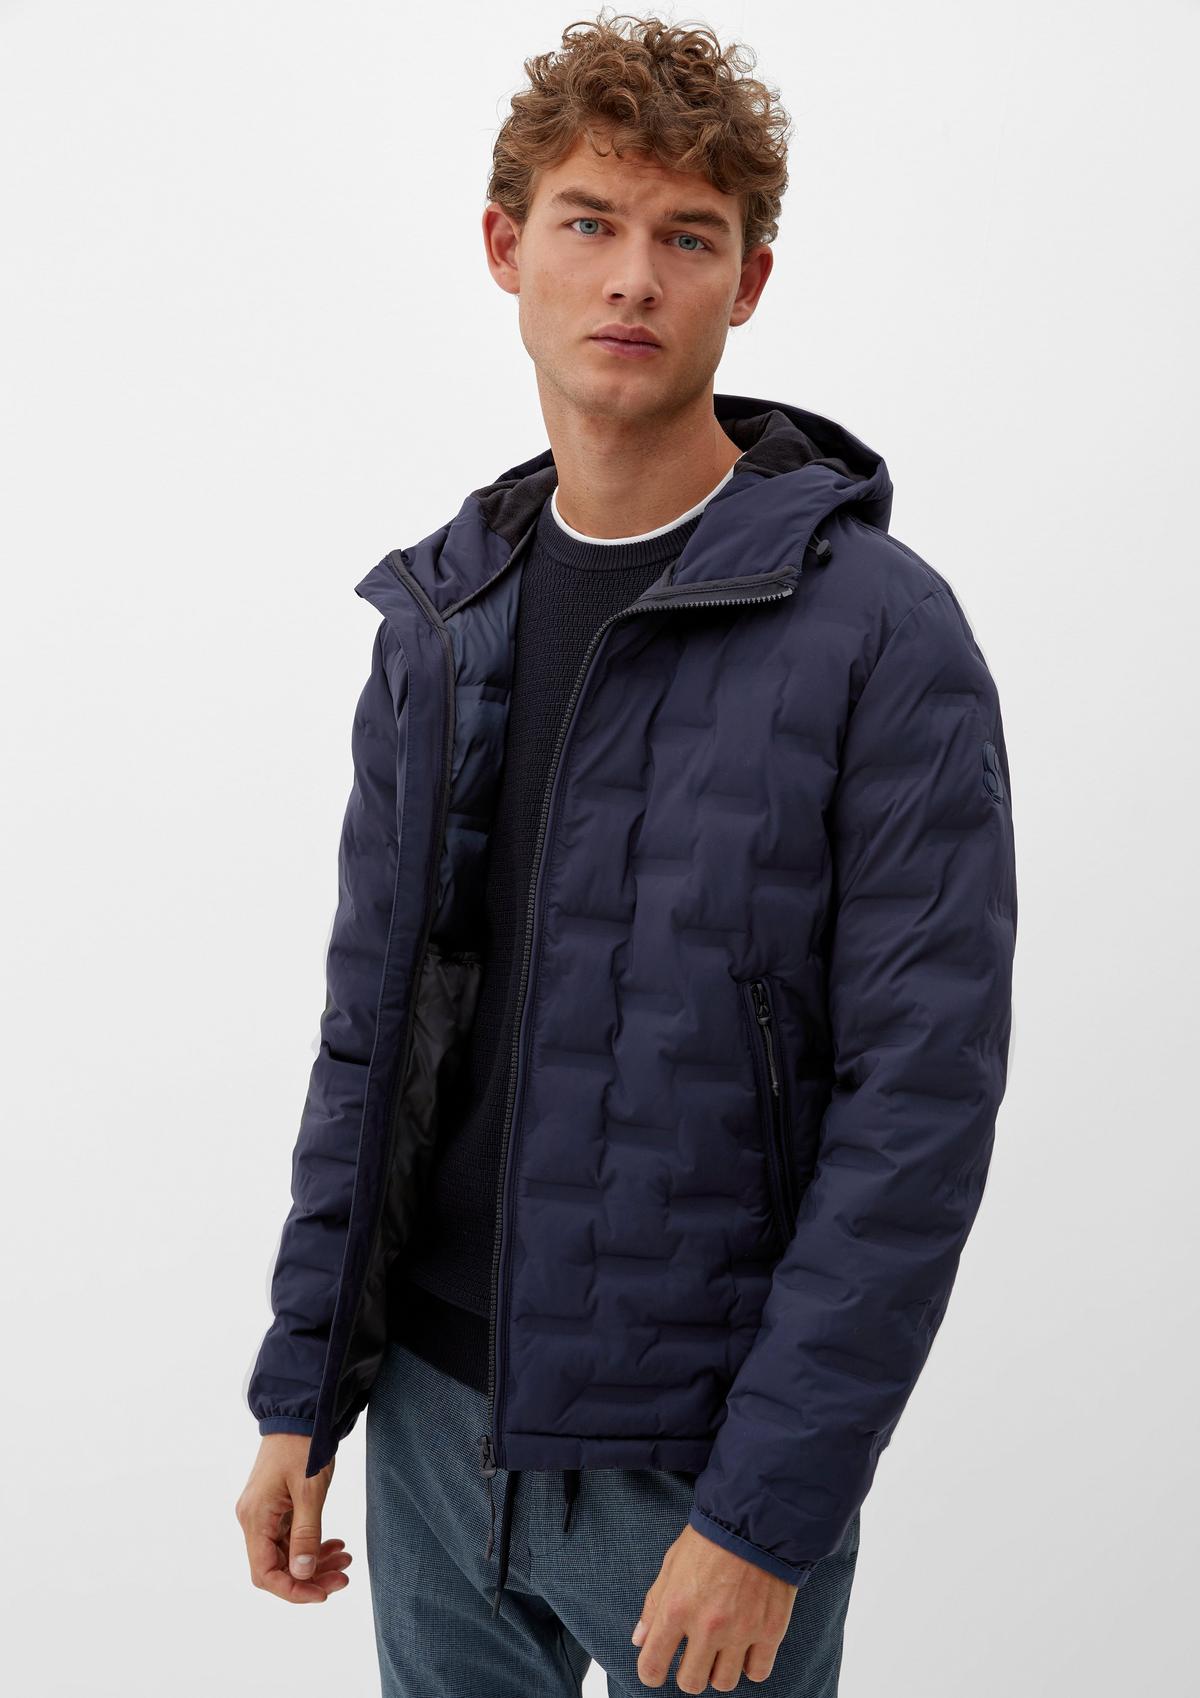 Softshell jacket with a stand-up - navy collar